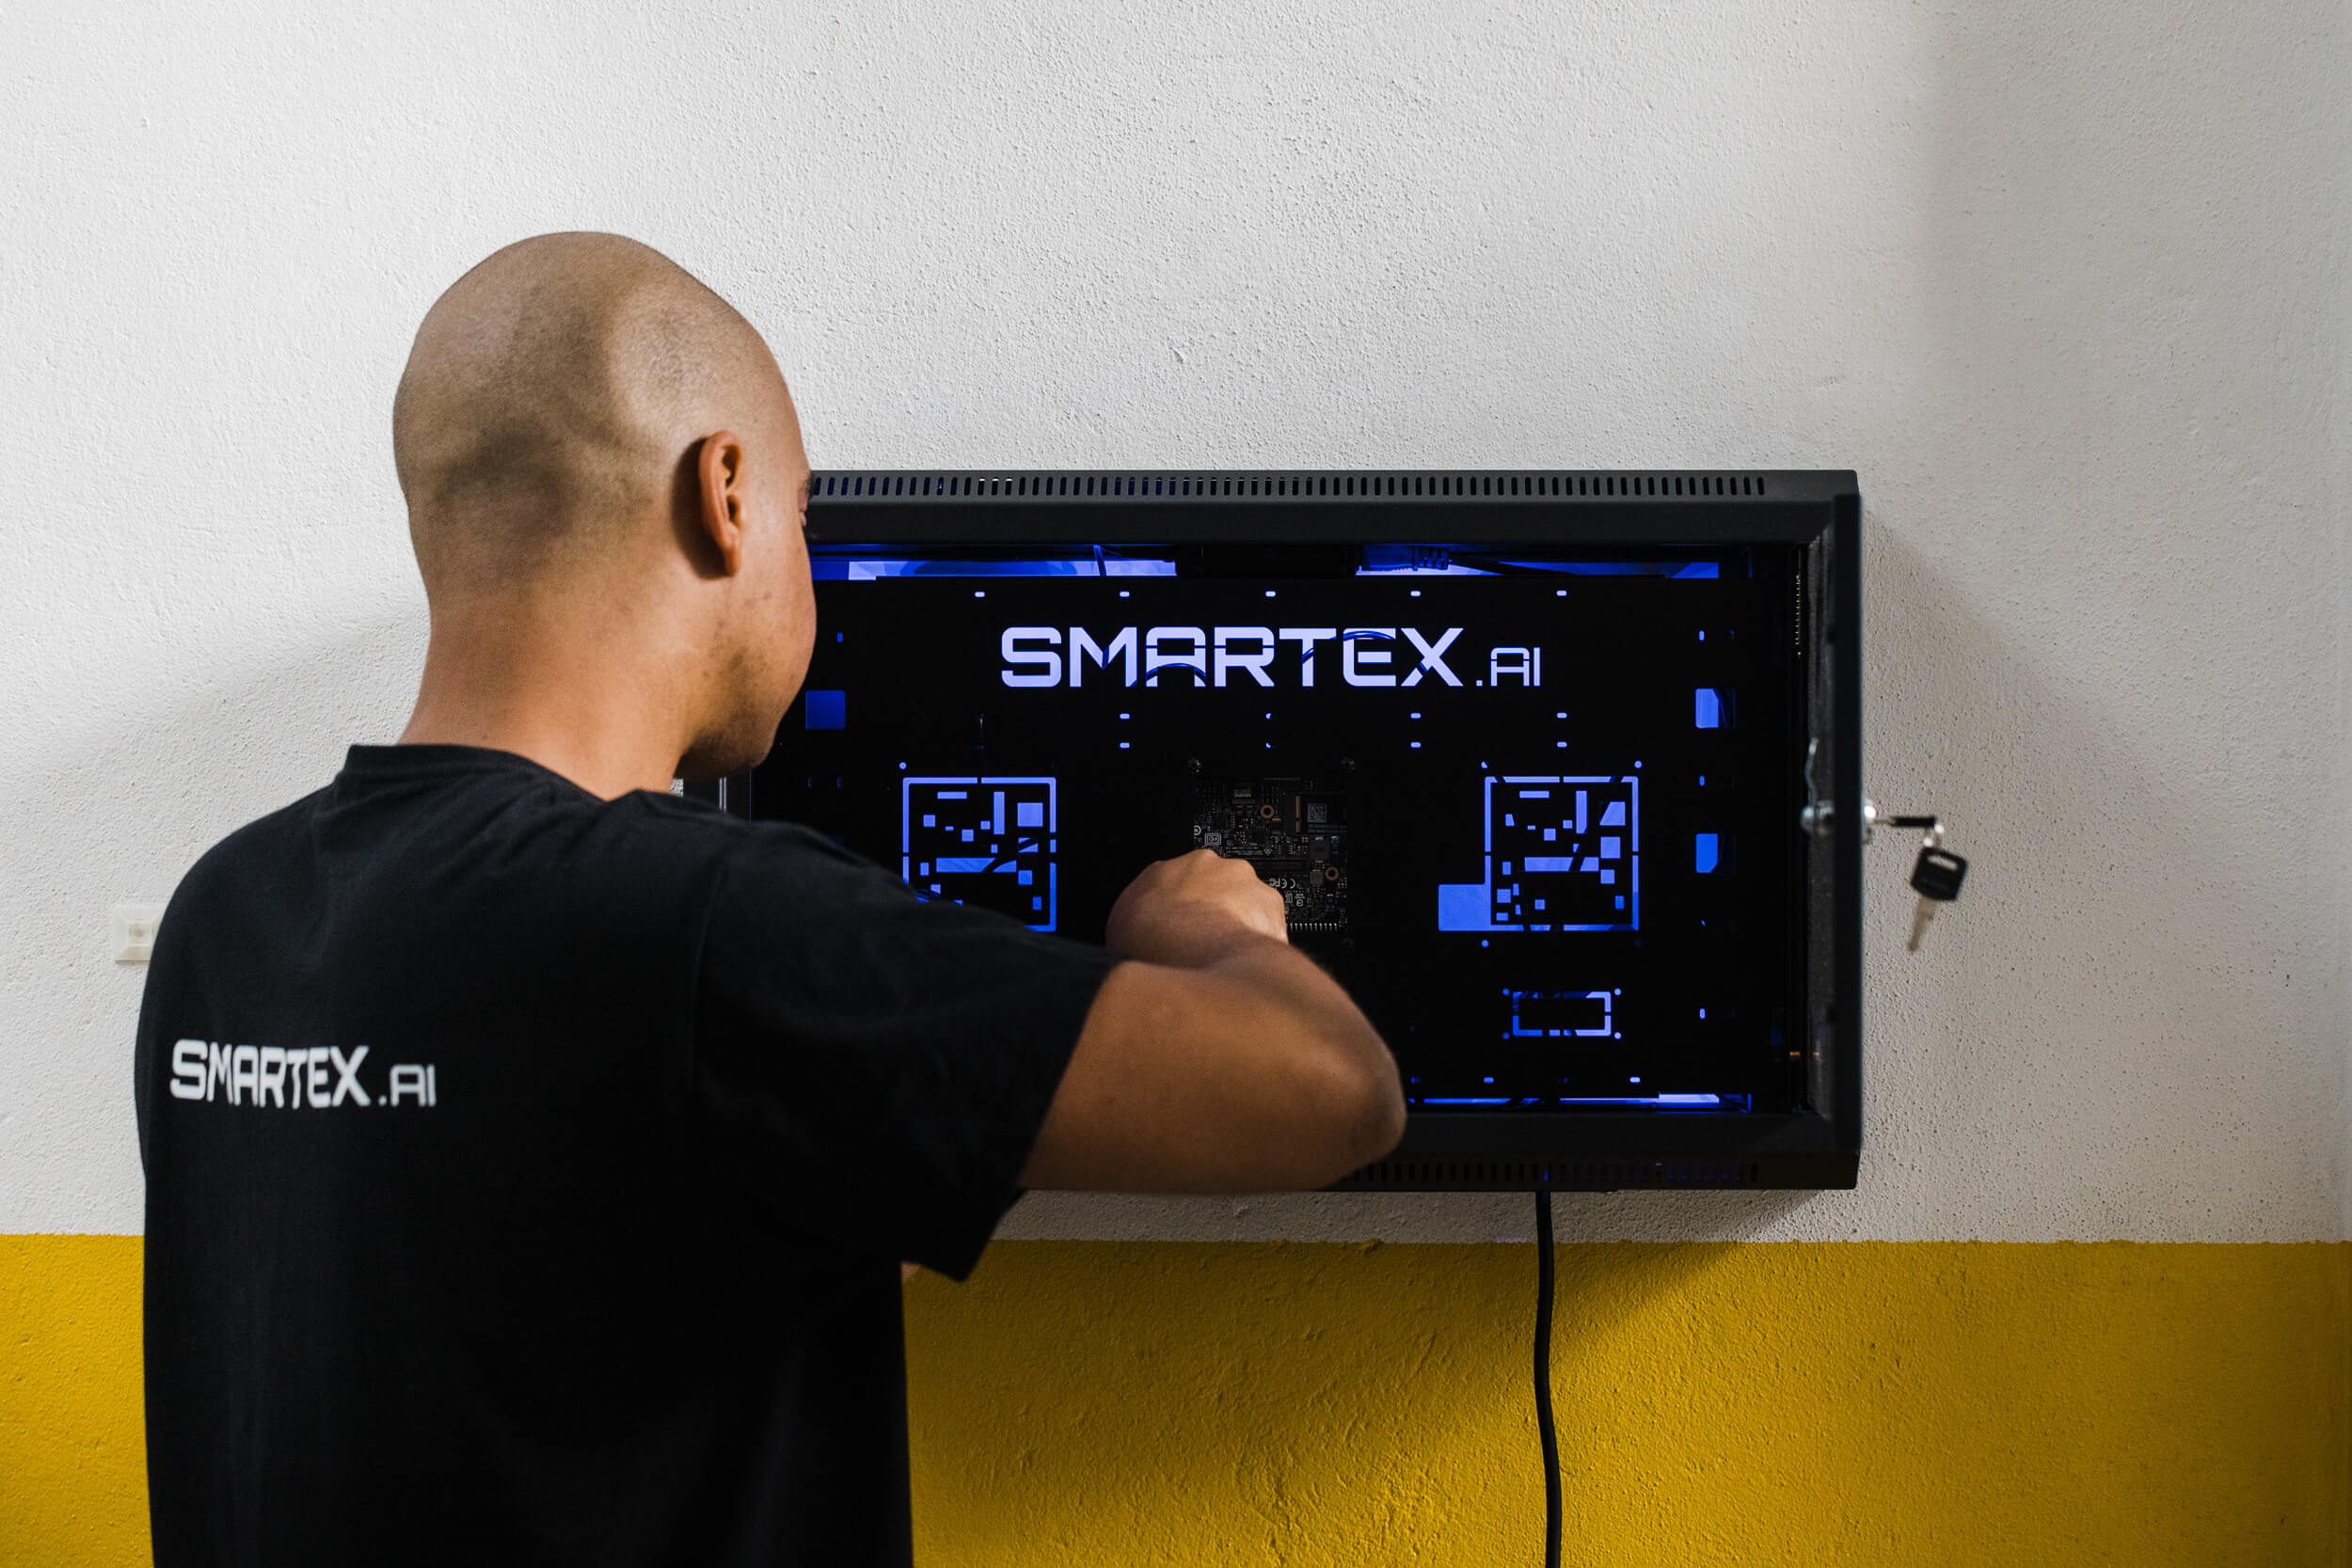 Smartex presents ‘the first’ inspection solution for circular knitting machines